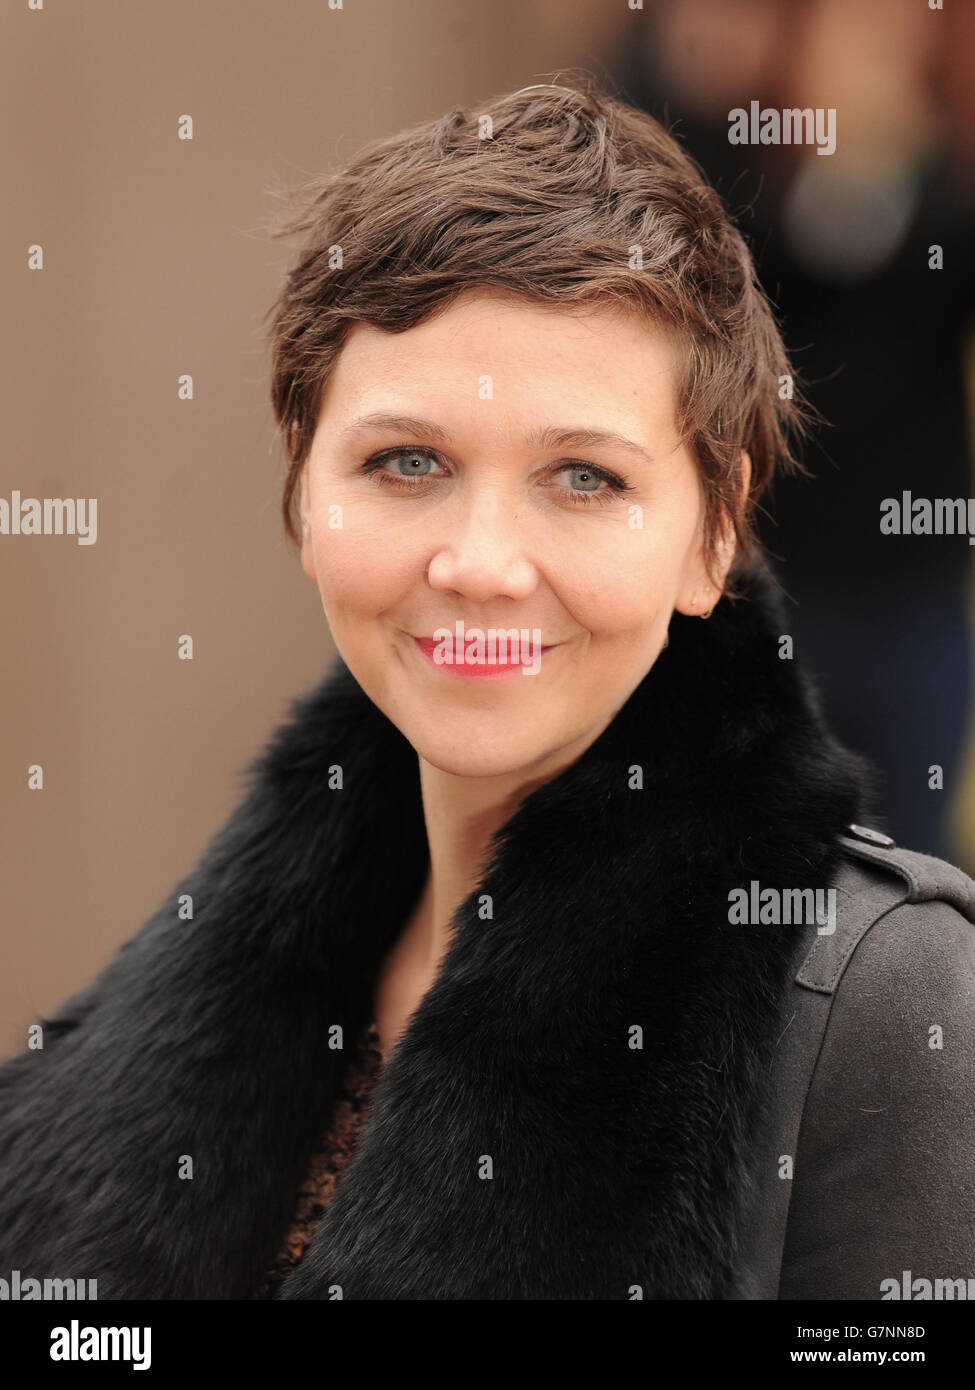 Maggie Gyllenhaal arriving for the Burberry Prorsum womenswear catwalk show at Kensington Gardens, as part of London Fashion Week. PRESS ASSOCIATION Photo. Picture date: Monday February 23, 2015. See PA story CONSUMER Fashion. Photo credit should read: Dominic Lipinski/PA Wire Stock Photo